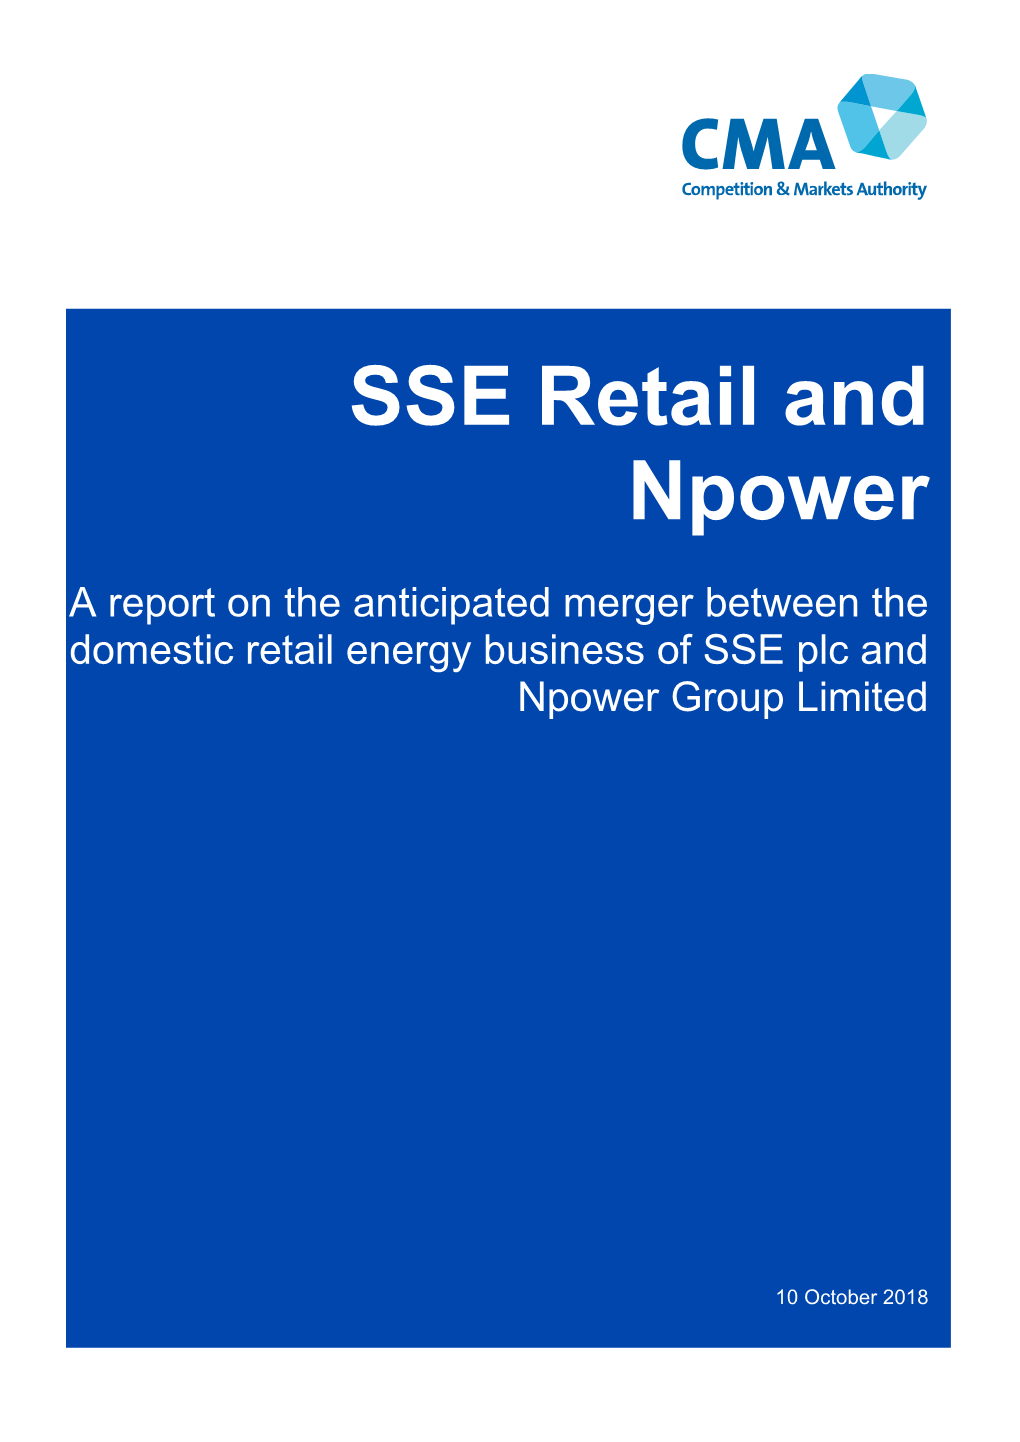 SSE Retail and Npower a Report on the Anticipated Merger Between the Domestic Retail Energy Business of SSE Plc and Npower Group Limited